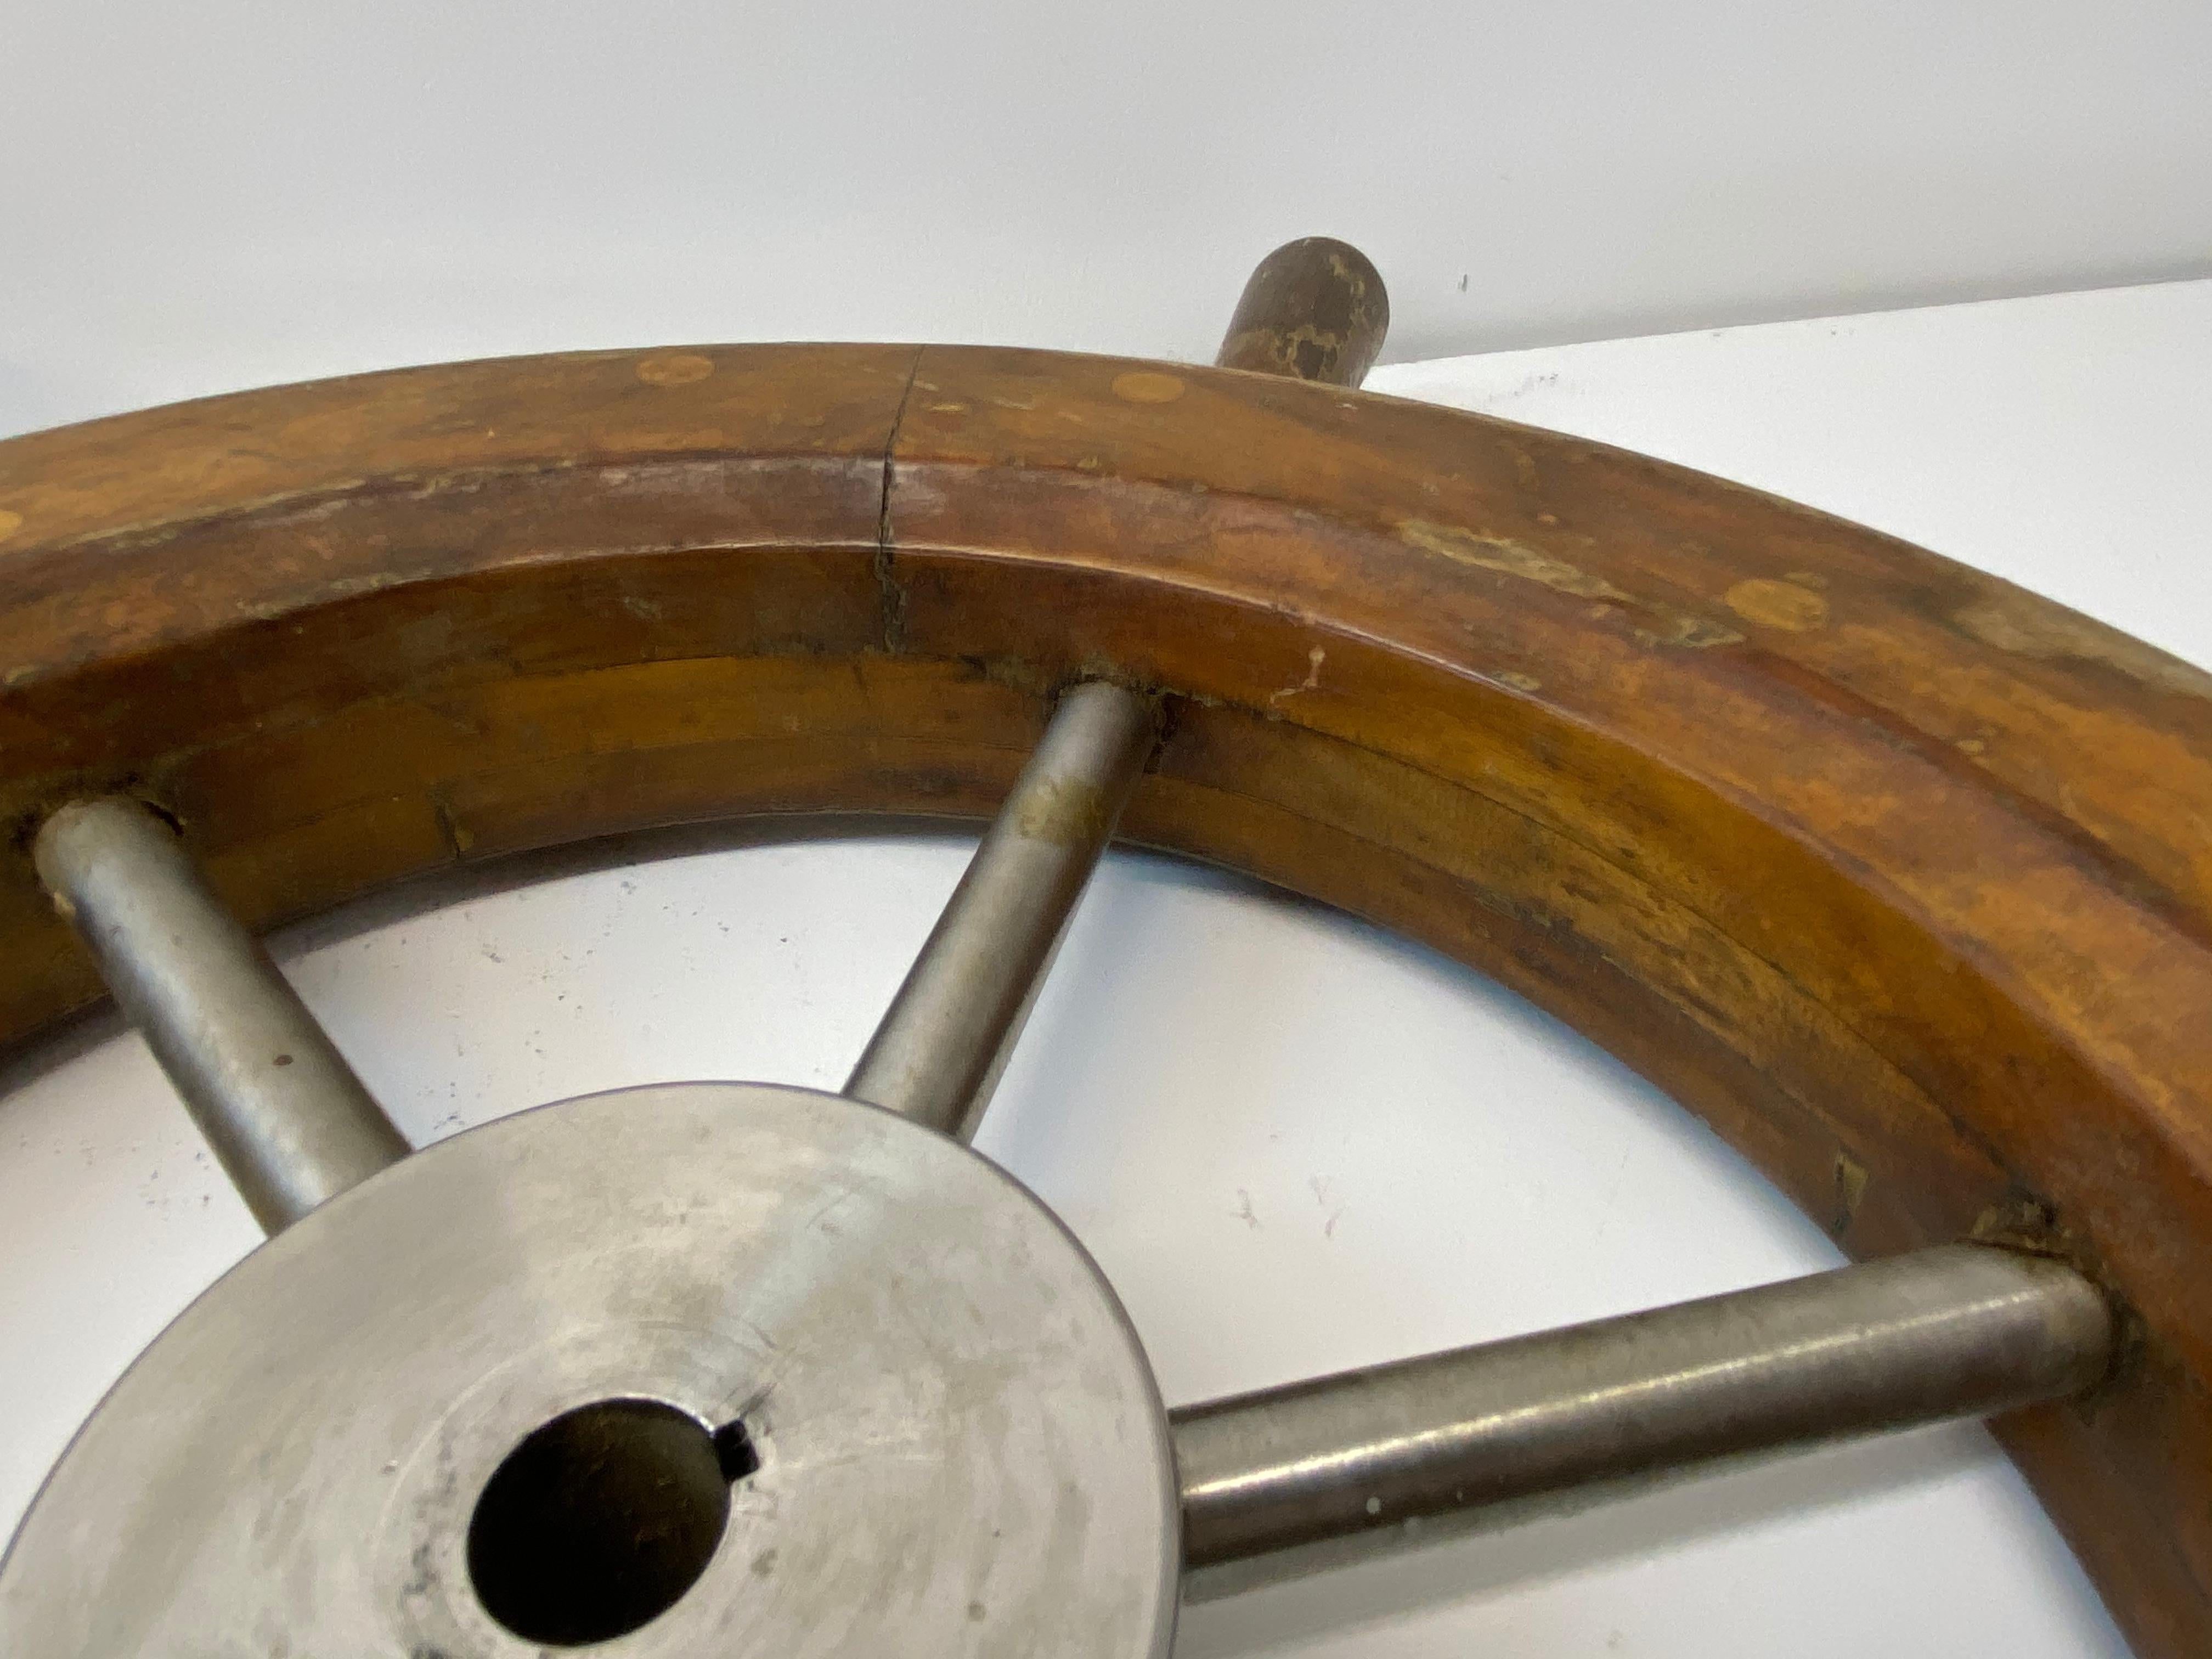 Early to Mid 20th Century Teak and Aluminum Ships Wheel 1930s to 1950s For Sale 1